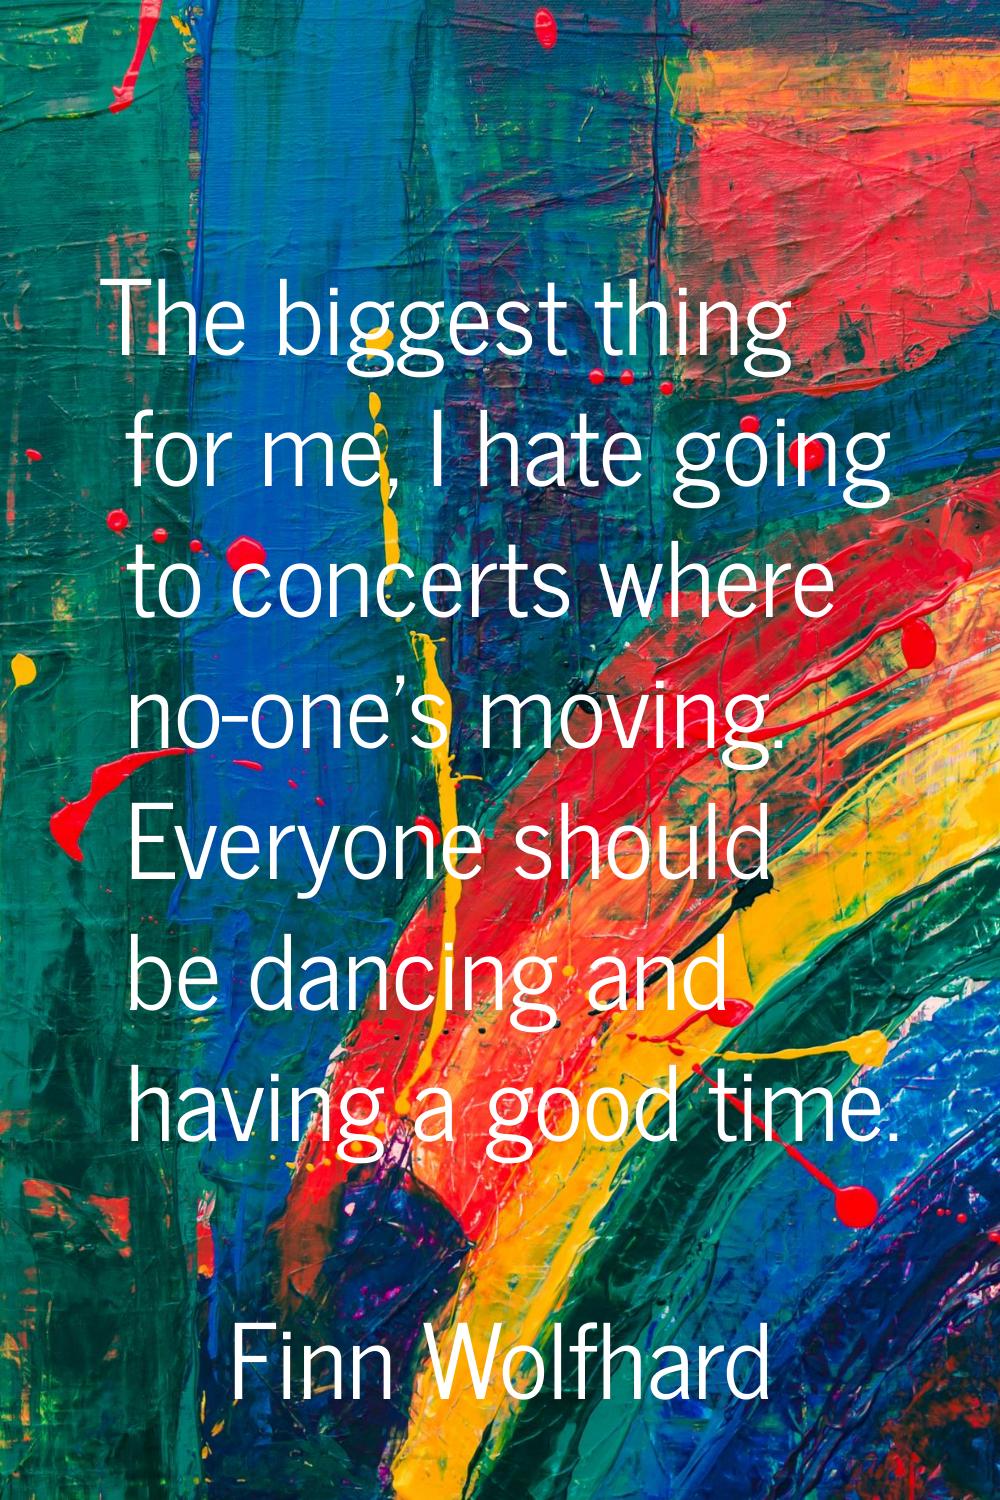 The biggest thing for me, I hate going to concerts where no-one's moving. Everyone should be dancin